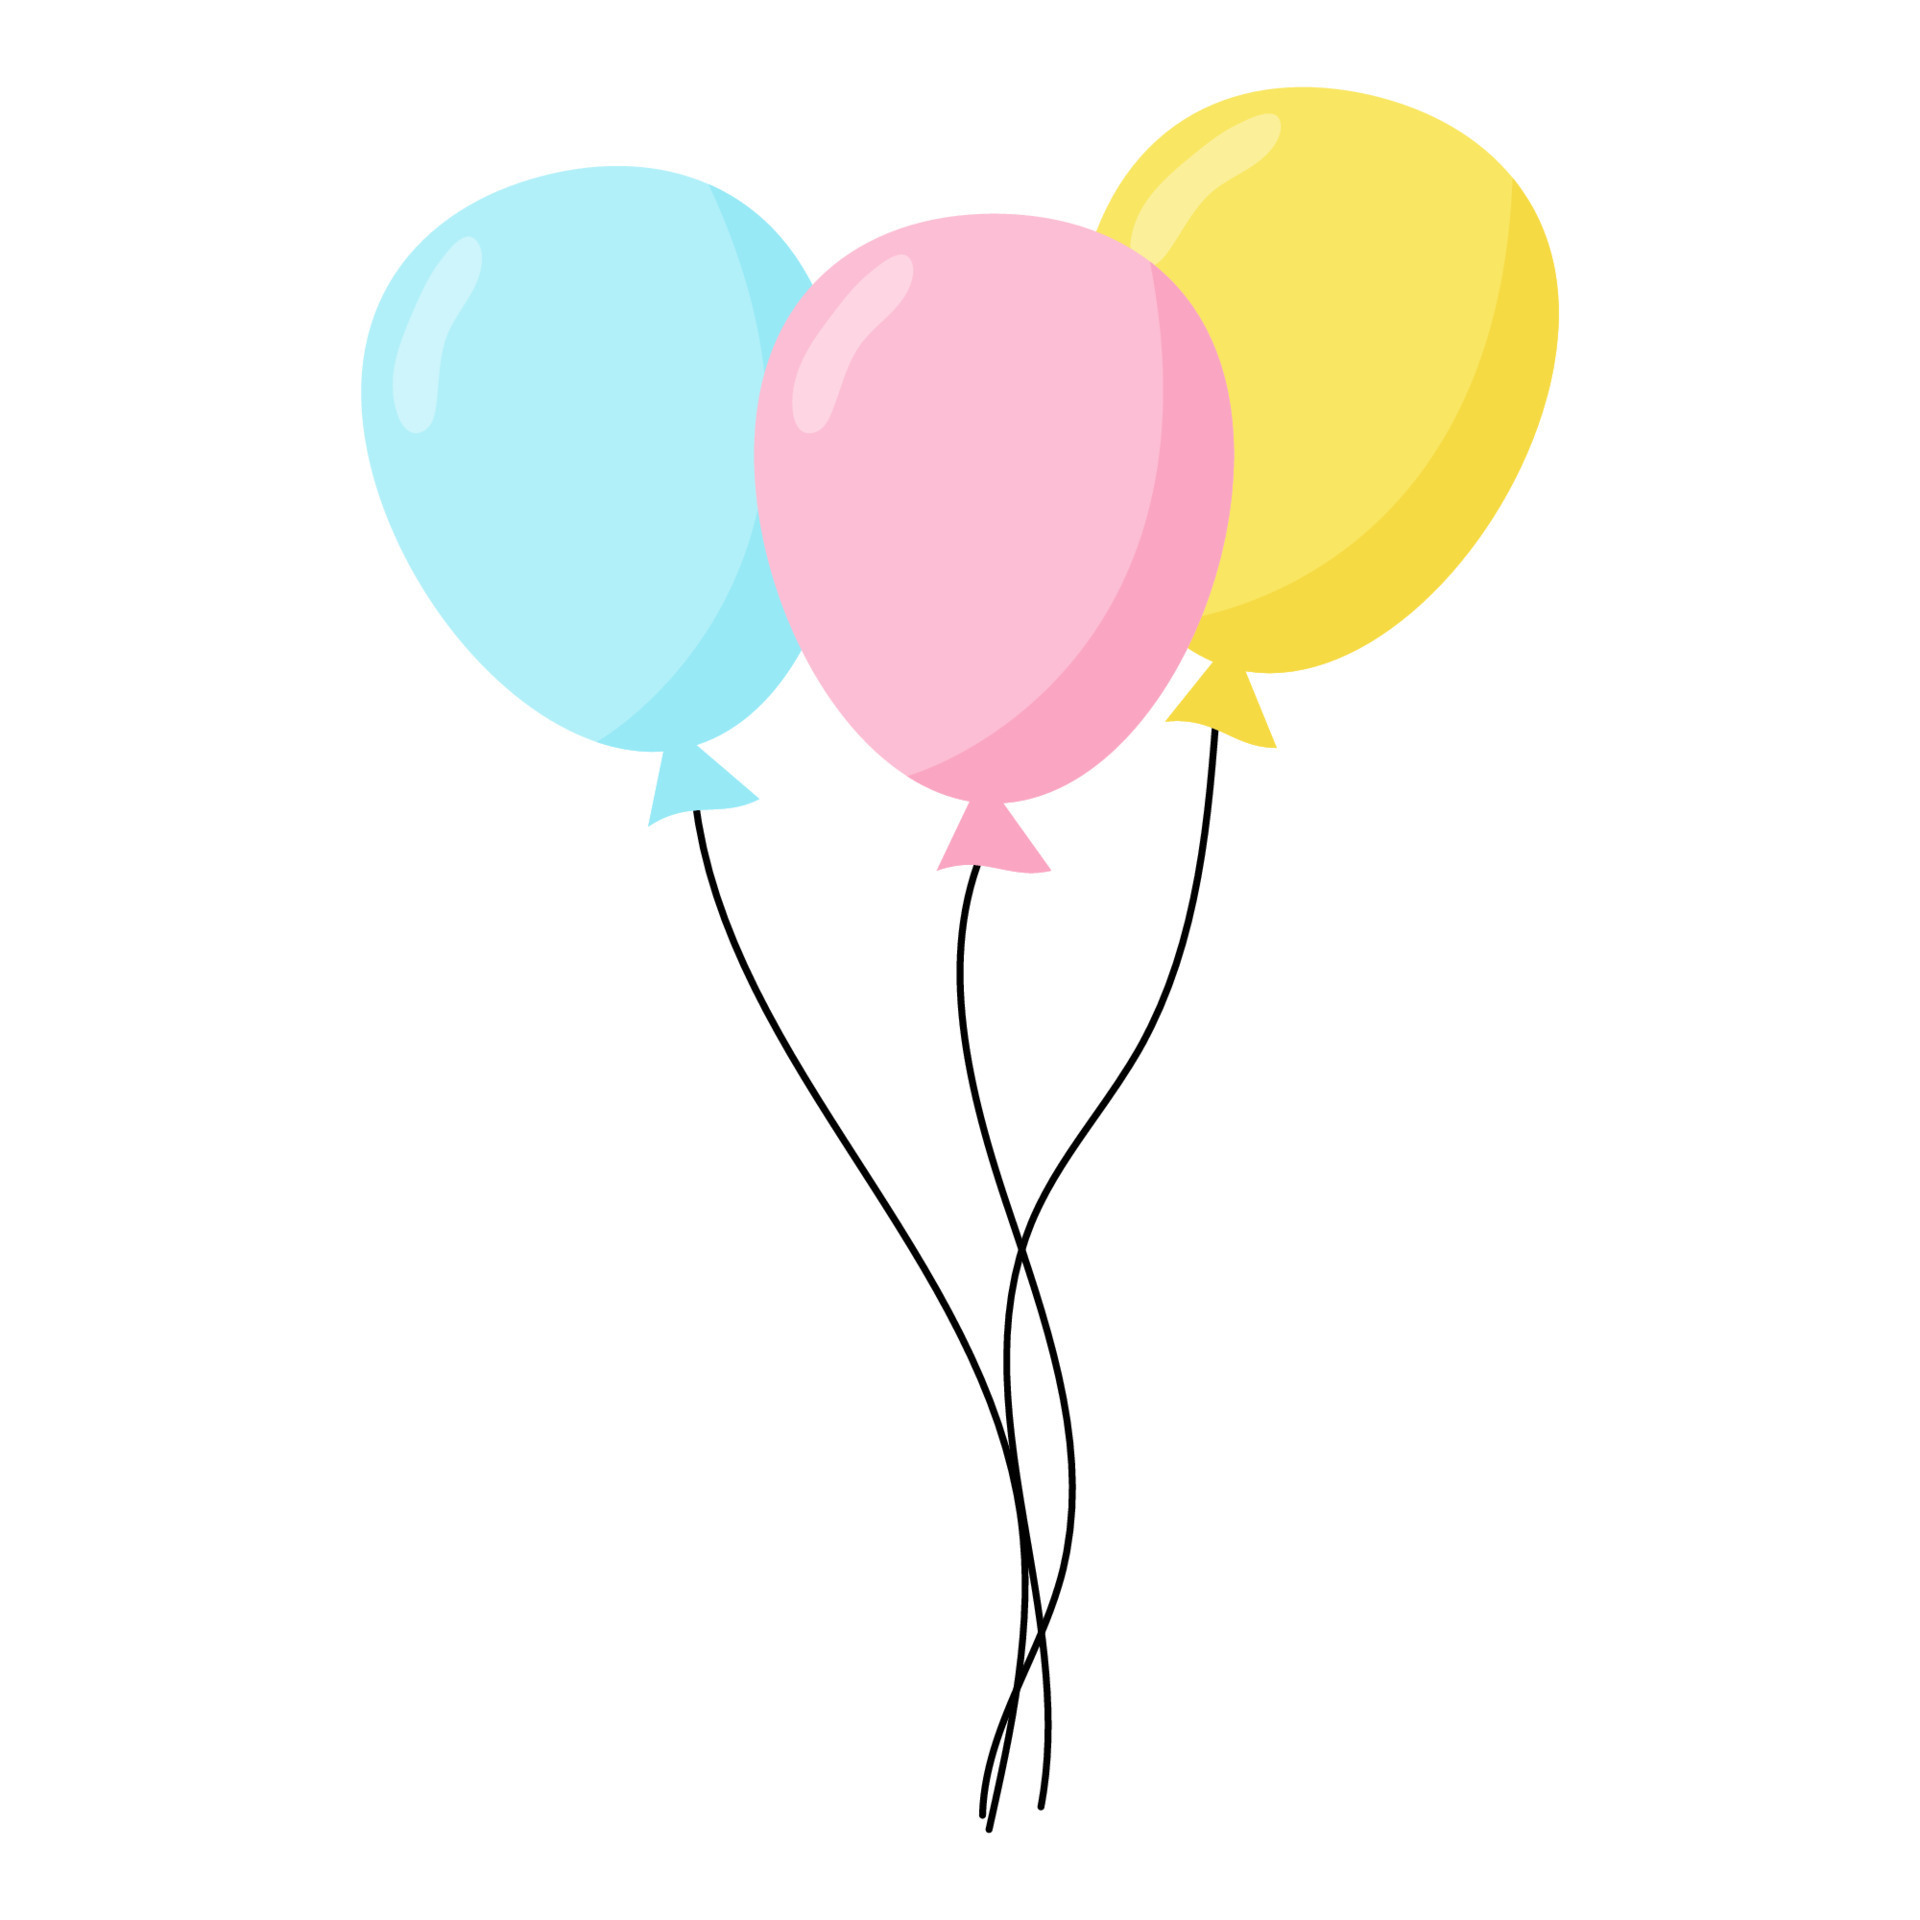 Balloon in cartoon style. Bunch of balloons for birthday and party